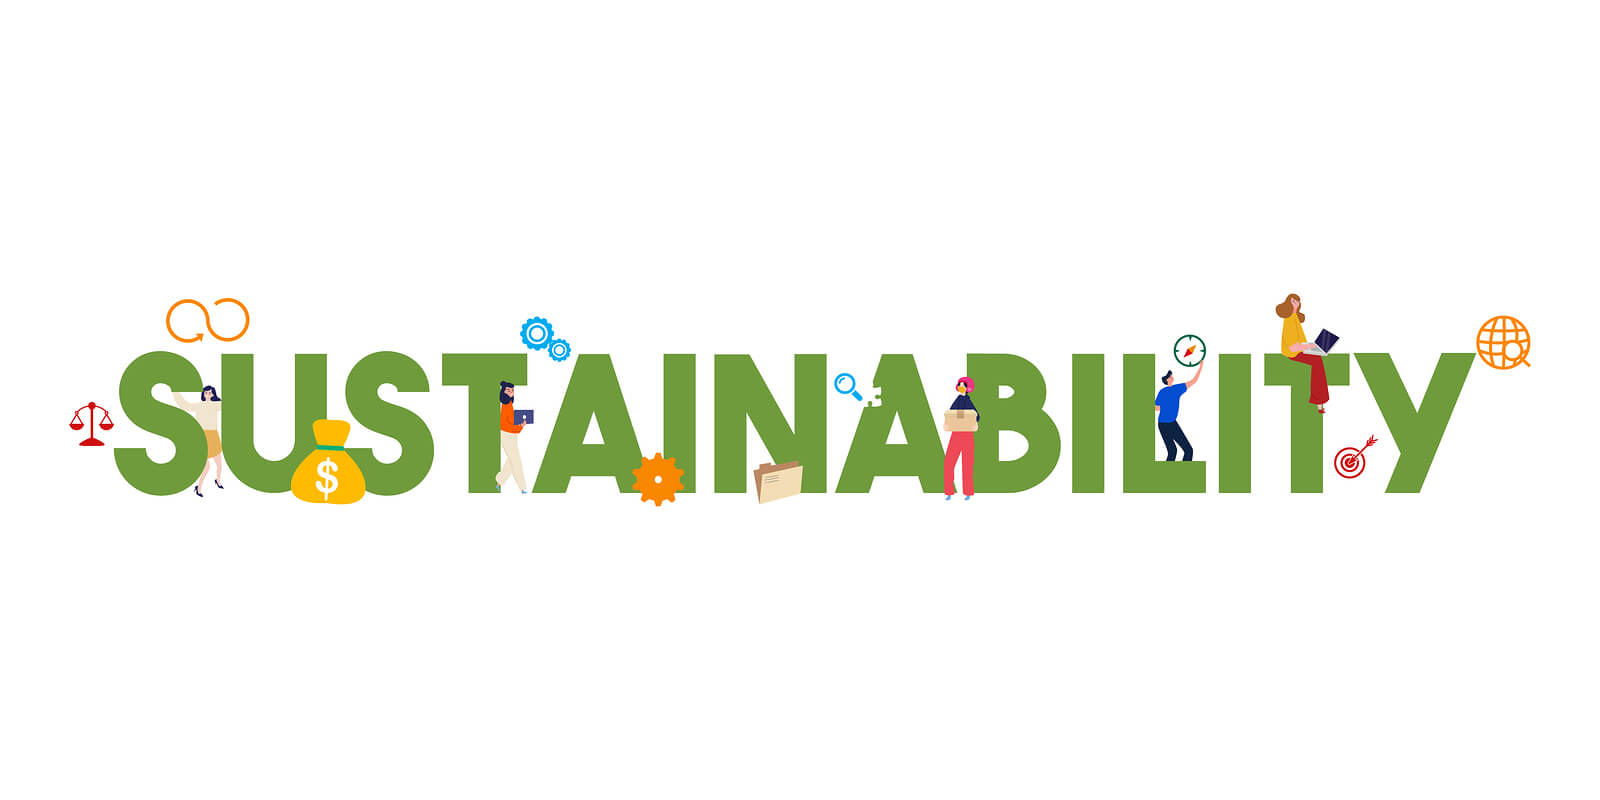 sustainability in green letters surrounded by illustrations